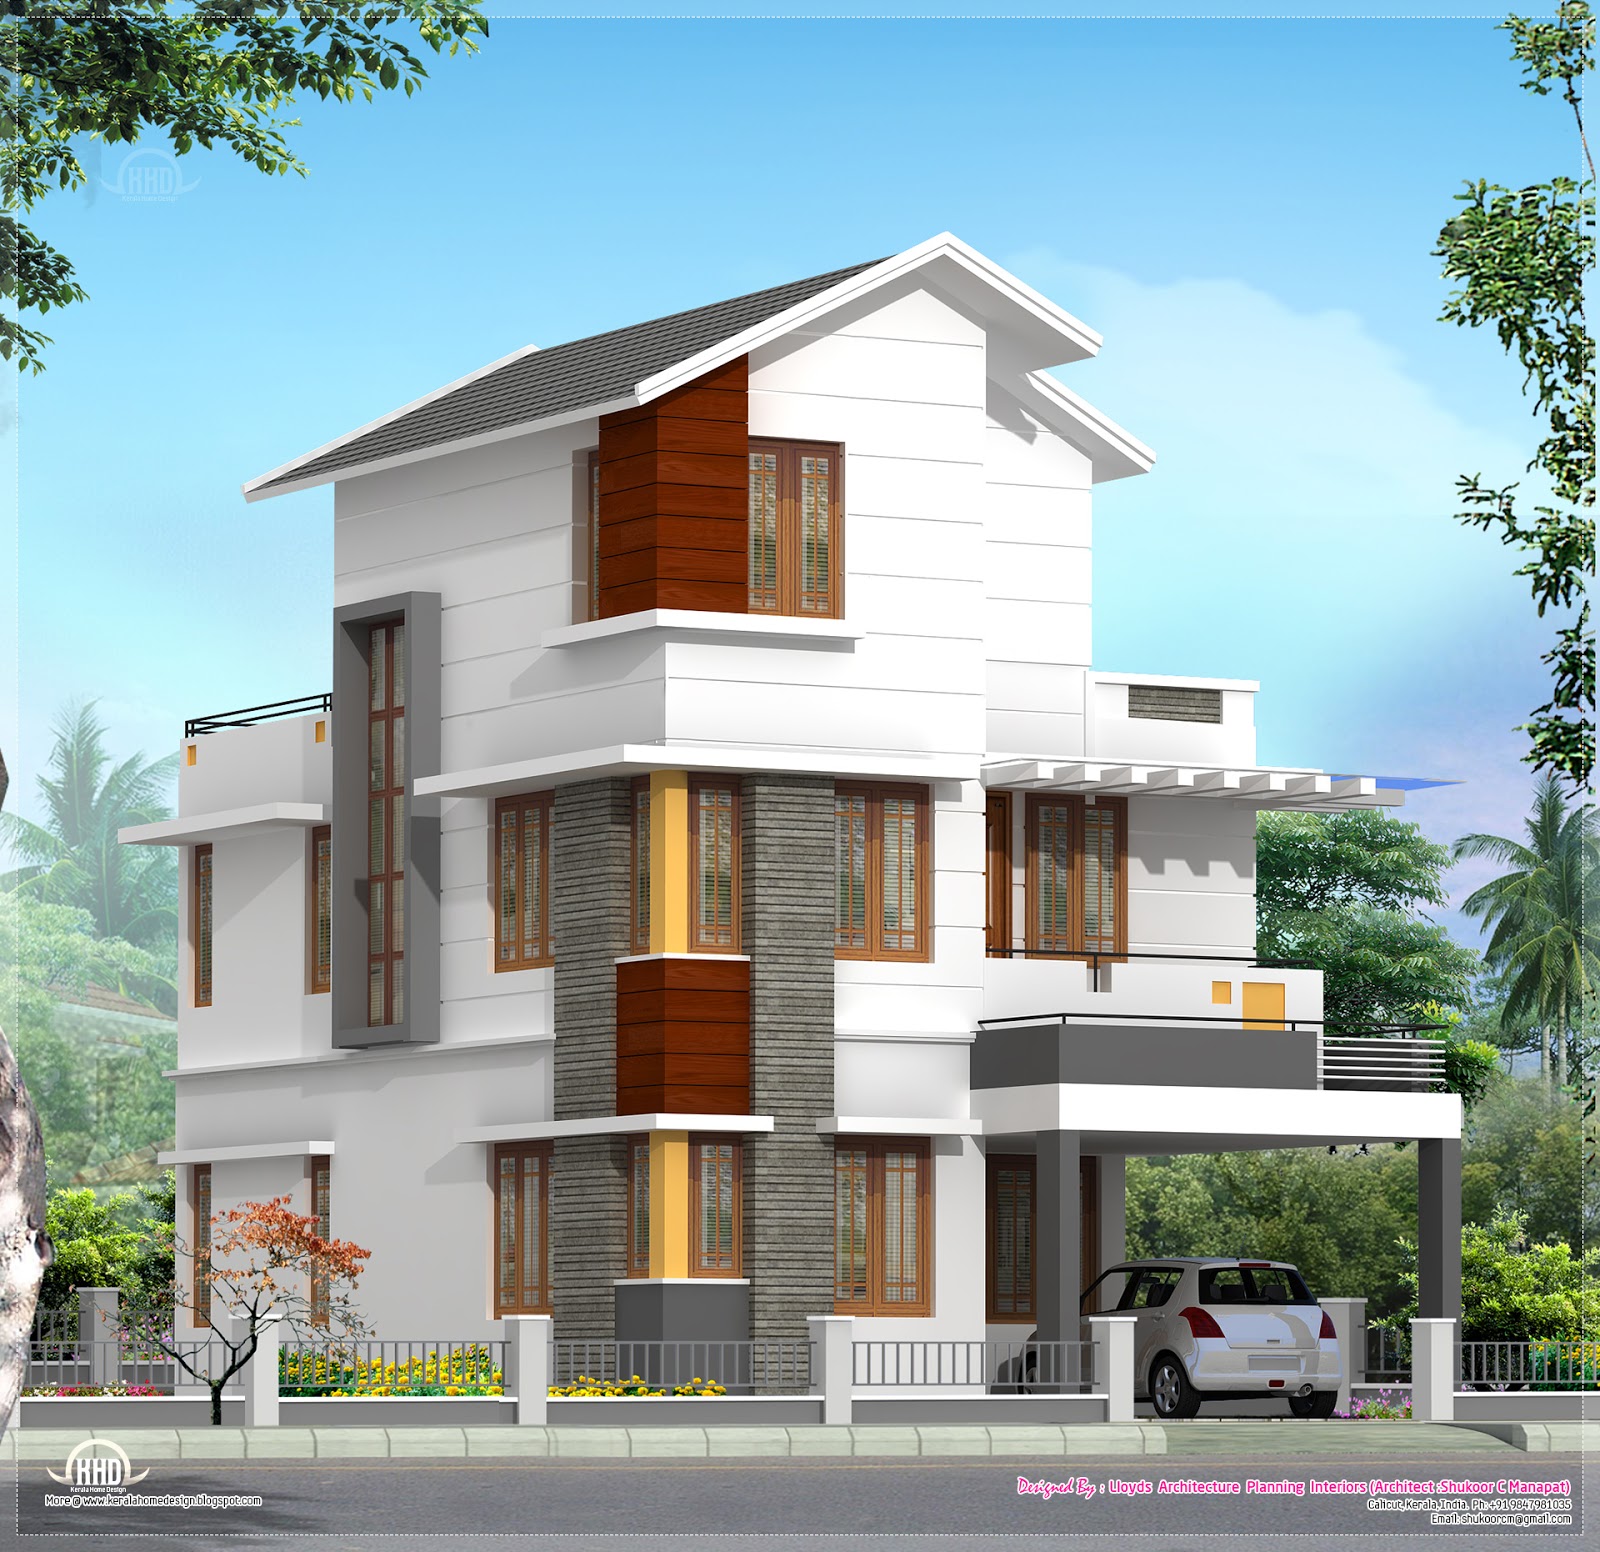 4 bedroom house  plan  in less than 3  cents  Kerala home  